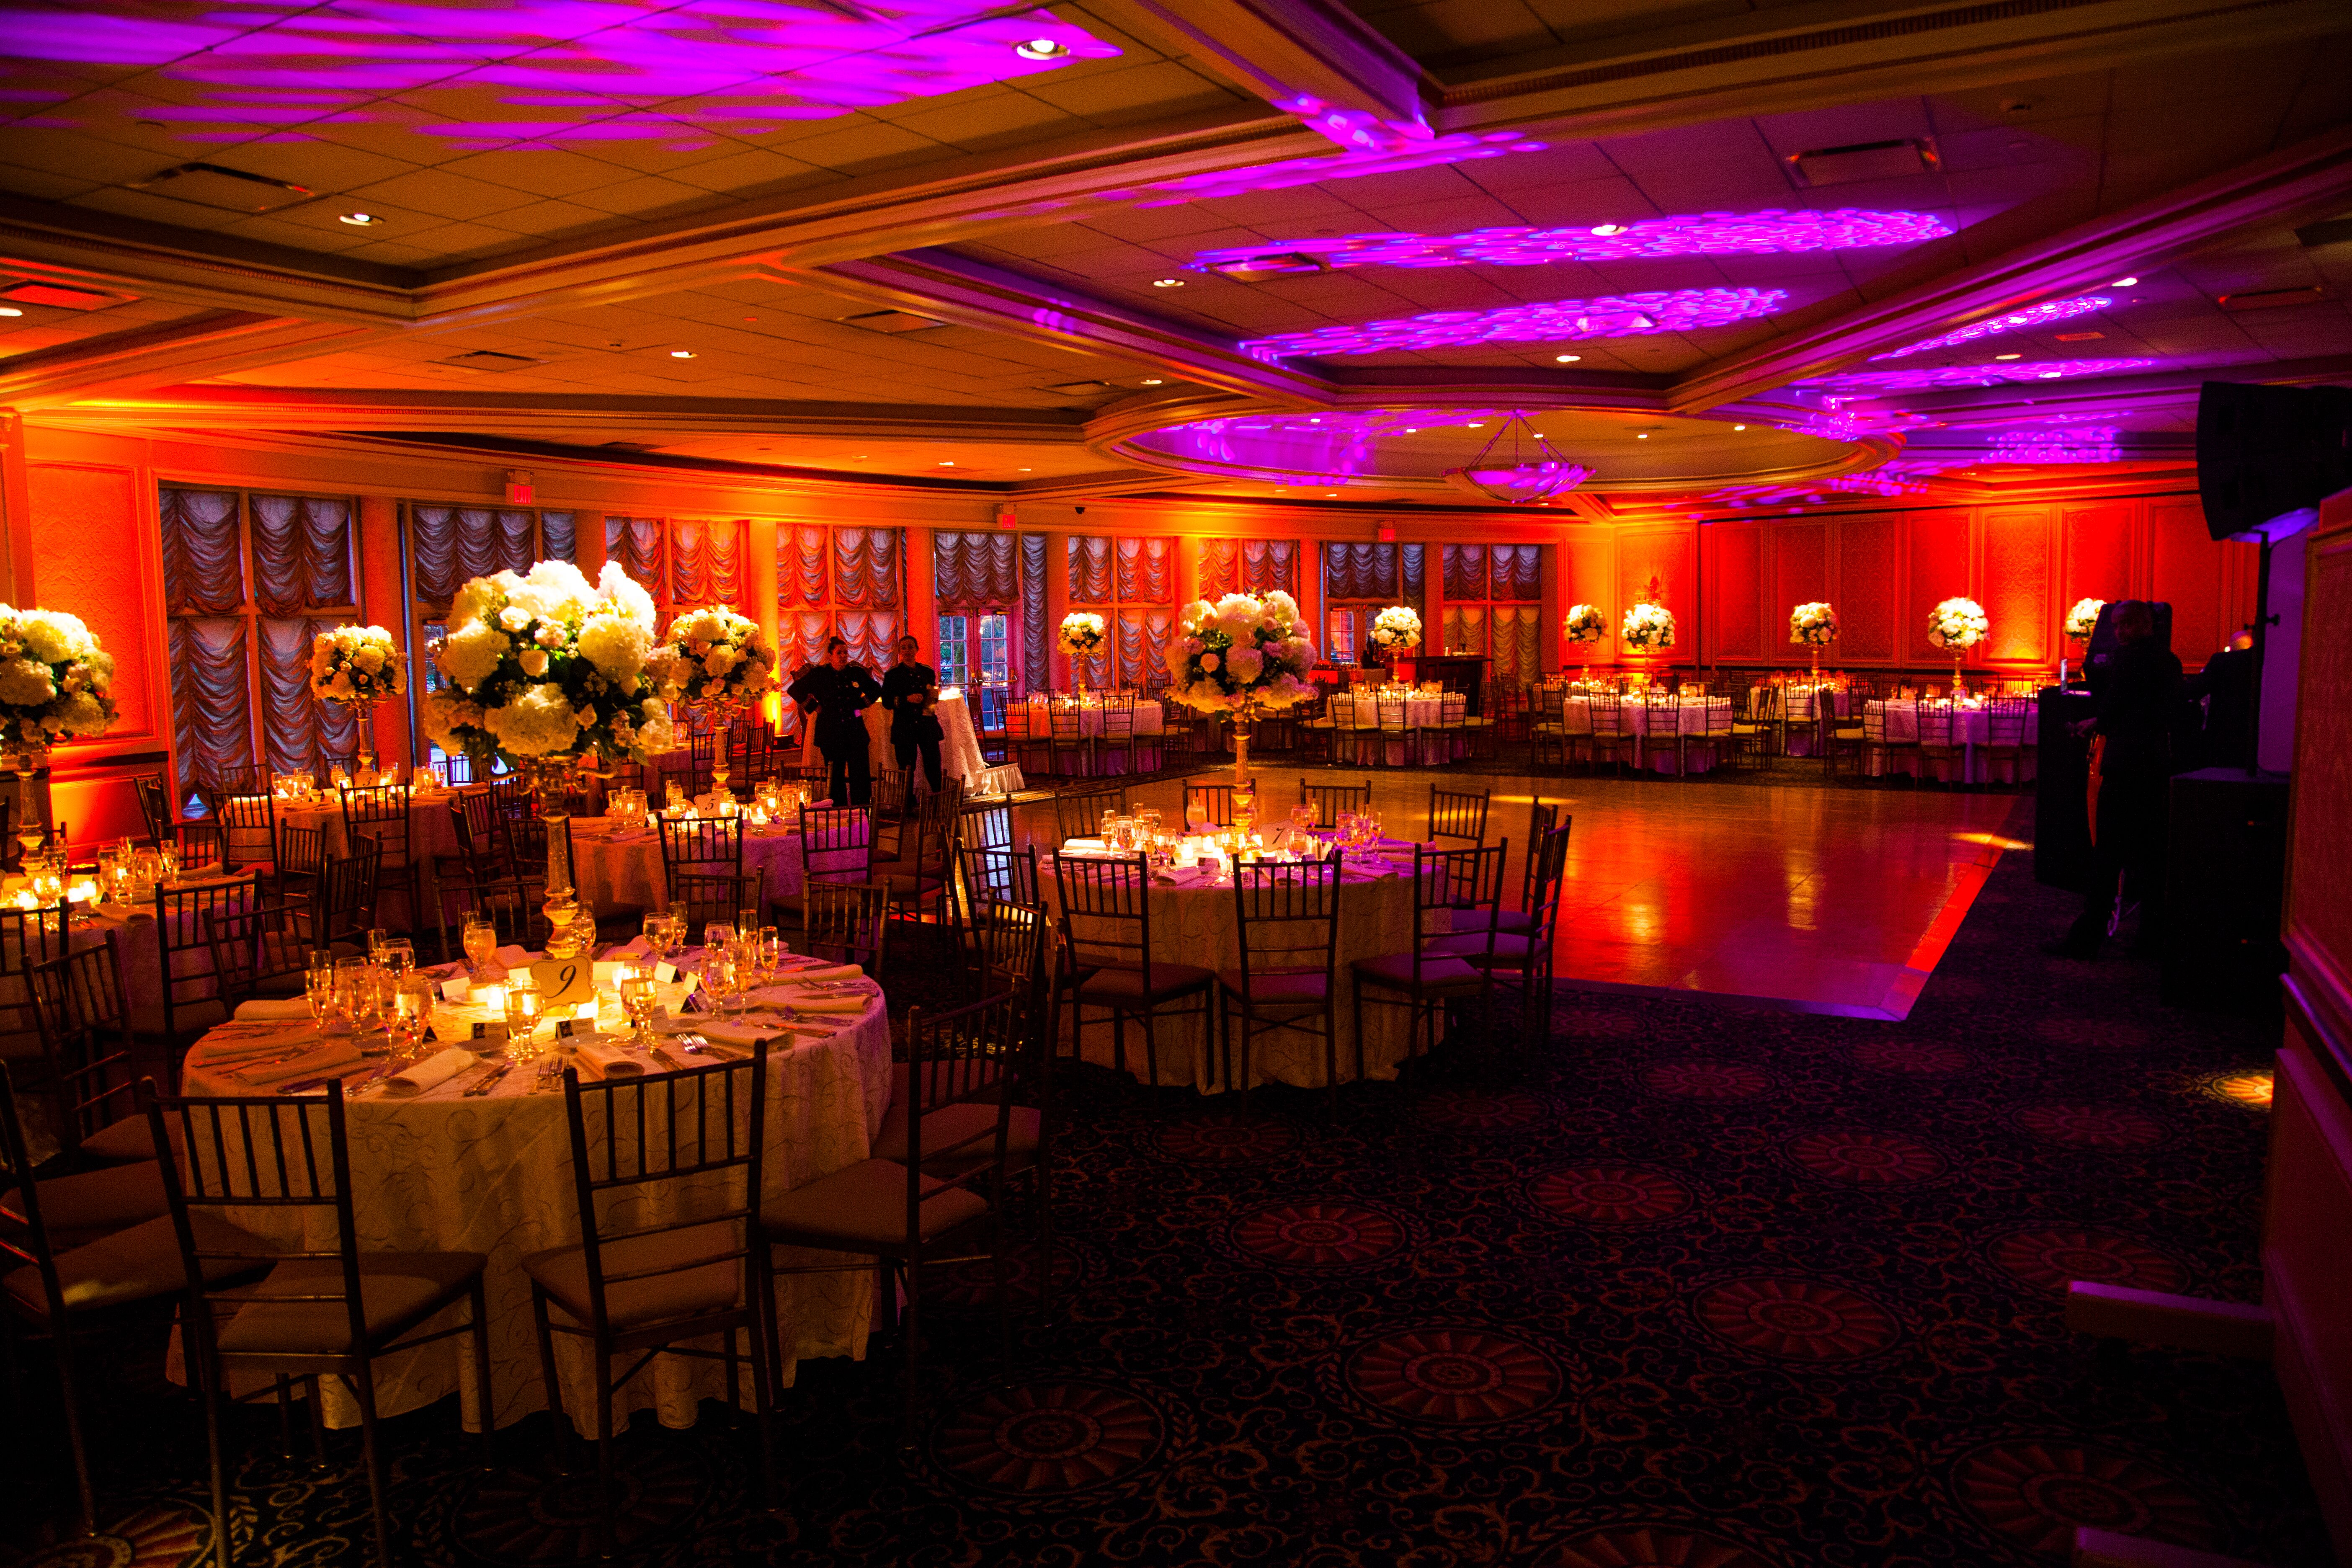 Ballroom Reception At Vip Country Club With Red And Purple Lighting